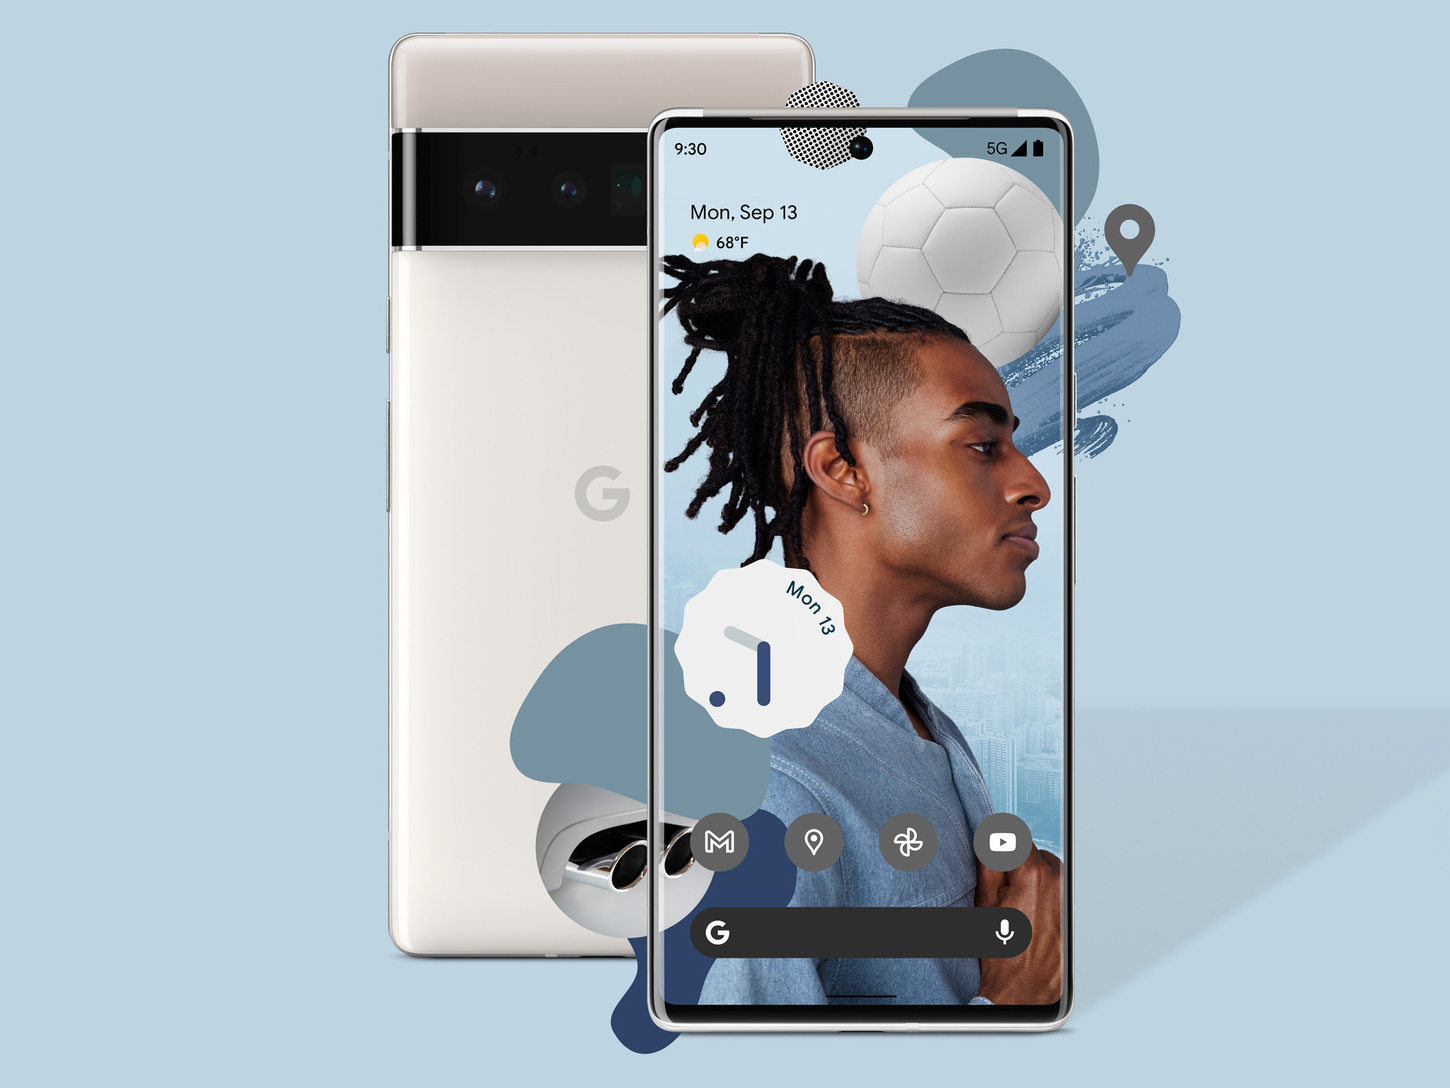 Google Pixel 6 Pro pictured with curved OLED screen and three rear cameras